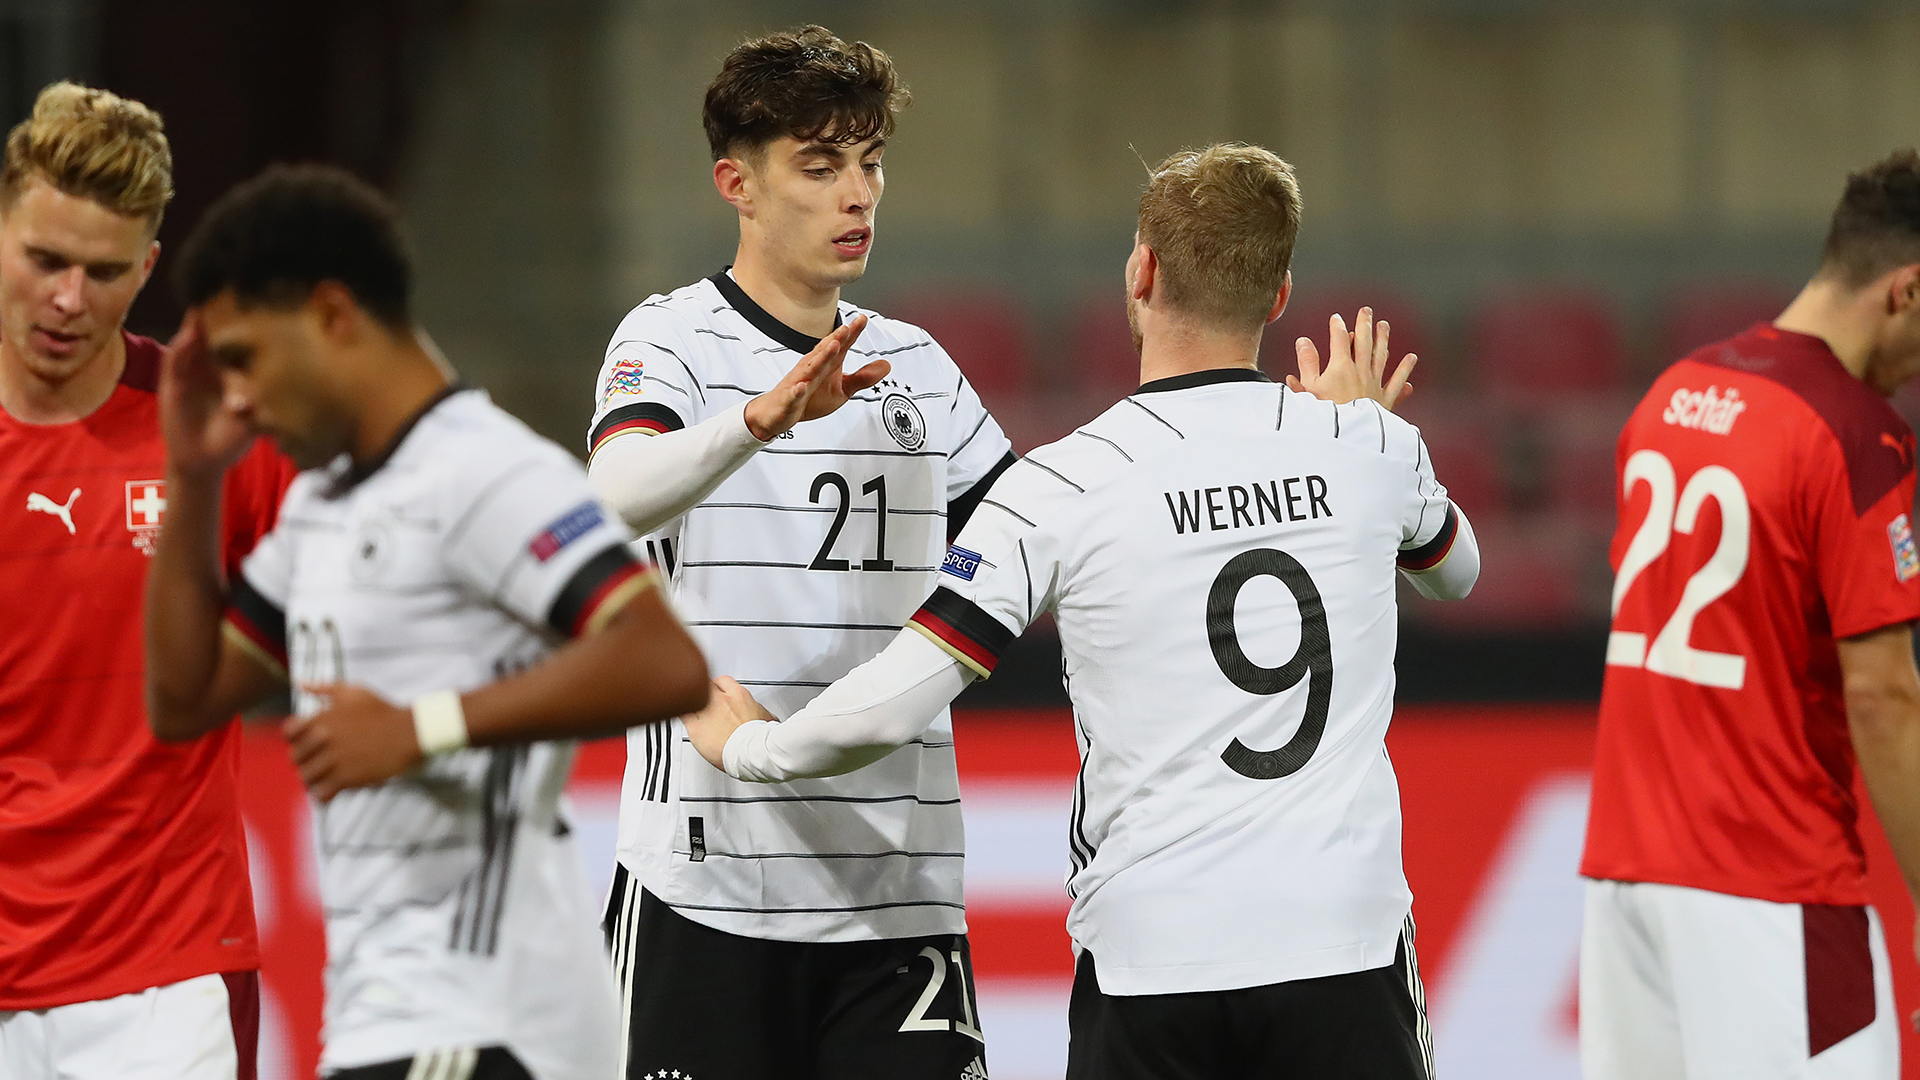 'We're a young side' - Germany star Havertz happy with character shown in Switzerland comeback